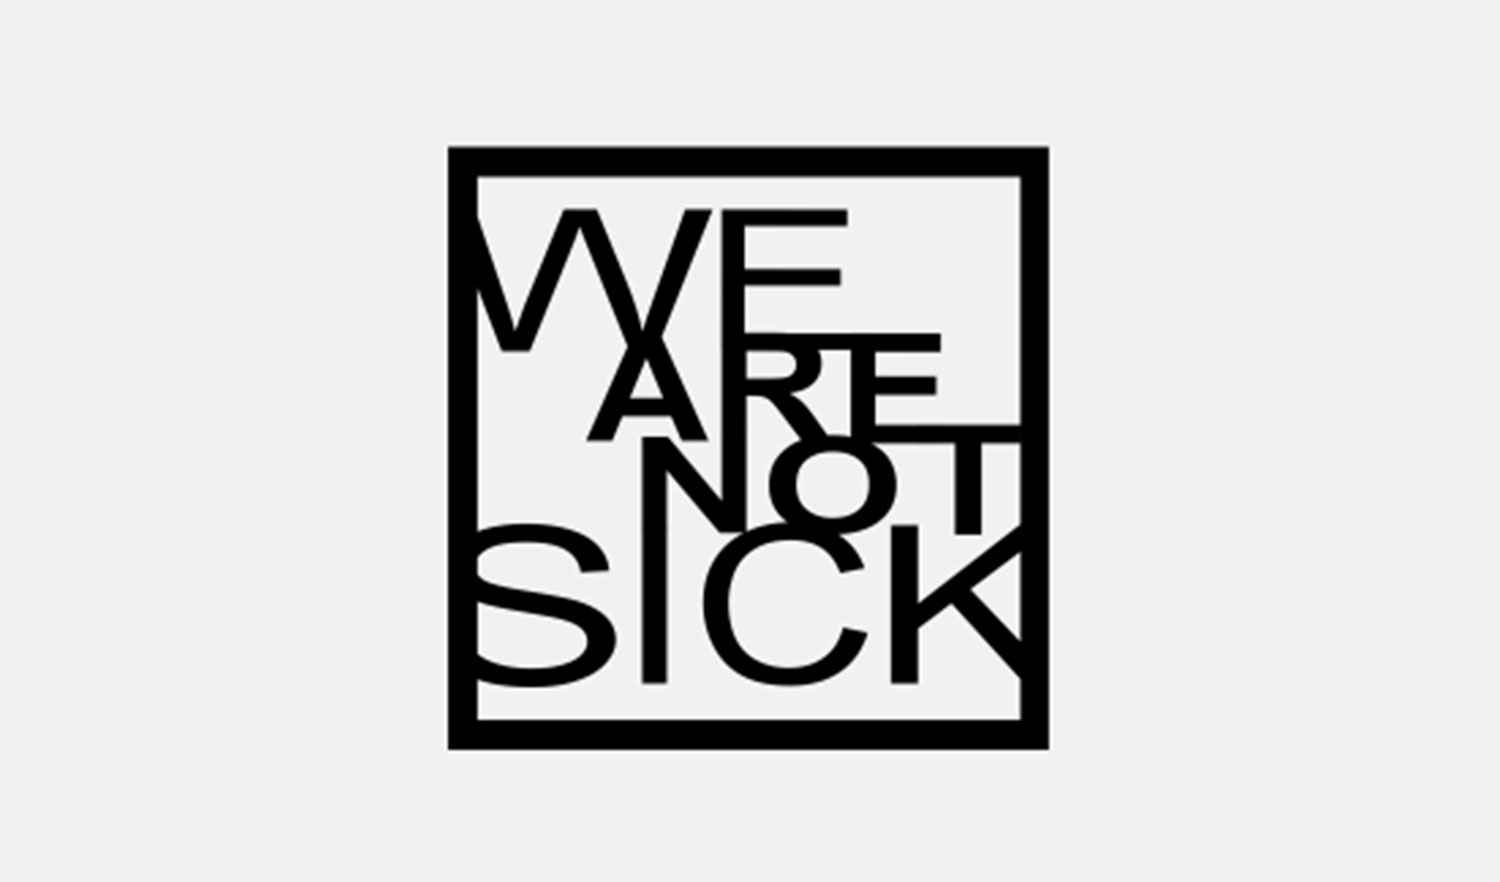 Stuck on the Platform/We Are Not Sick - hybrid lecture/music performance by Geert Lovink and John Longwalker